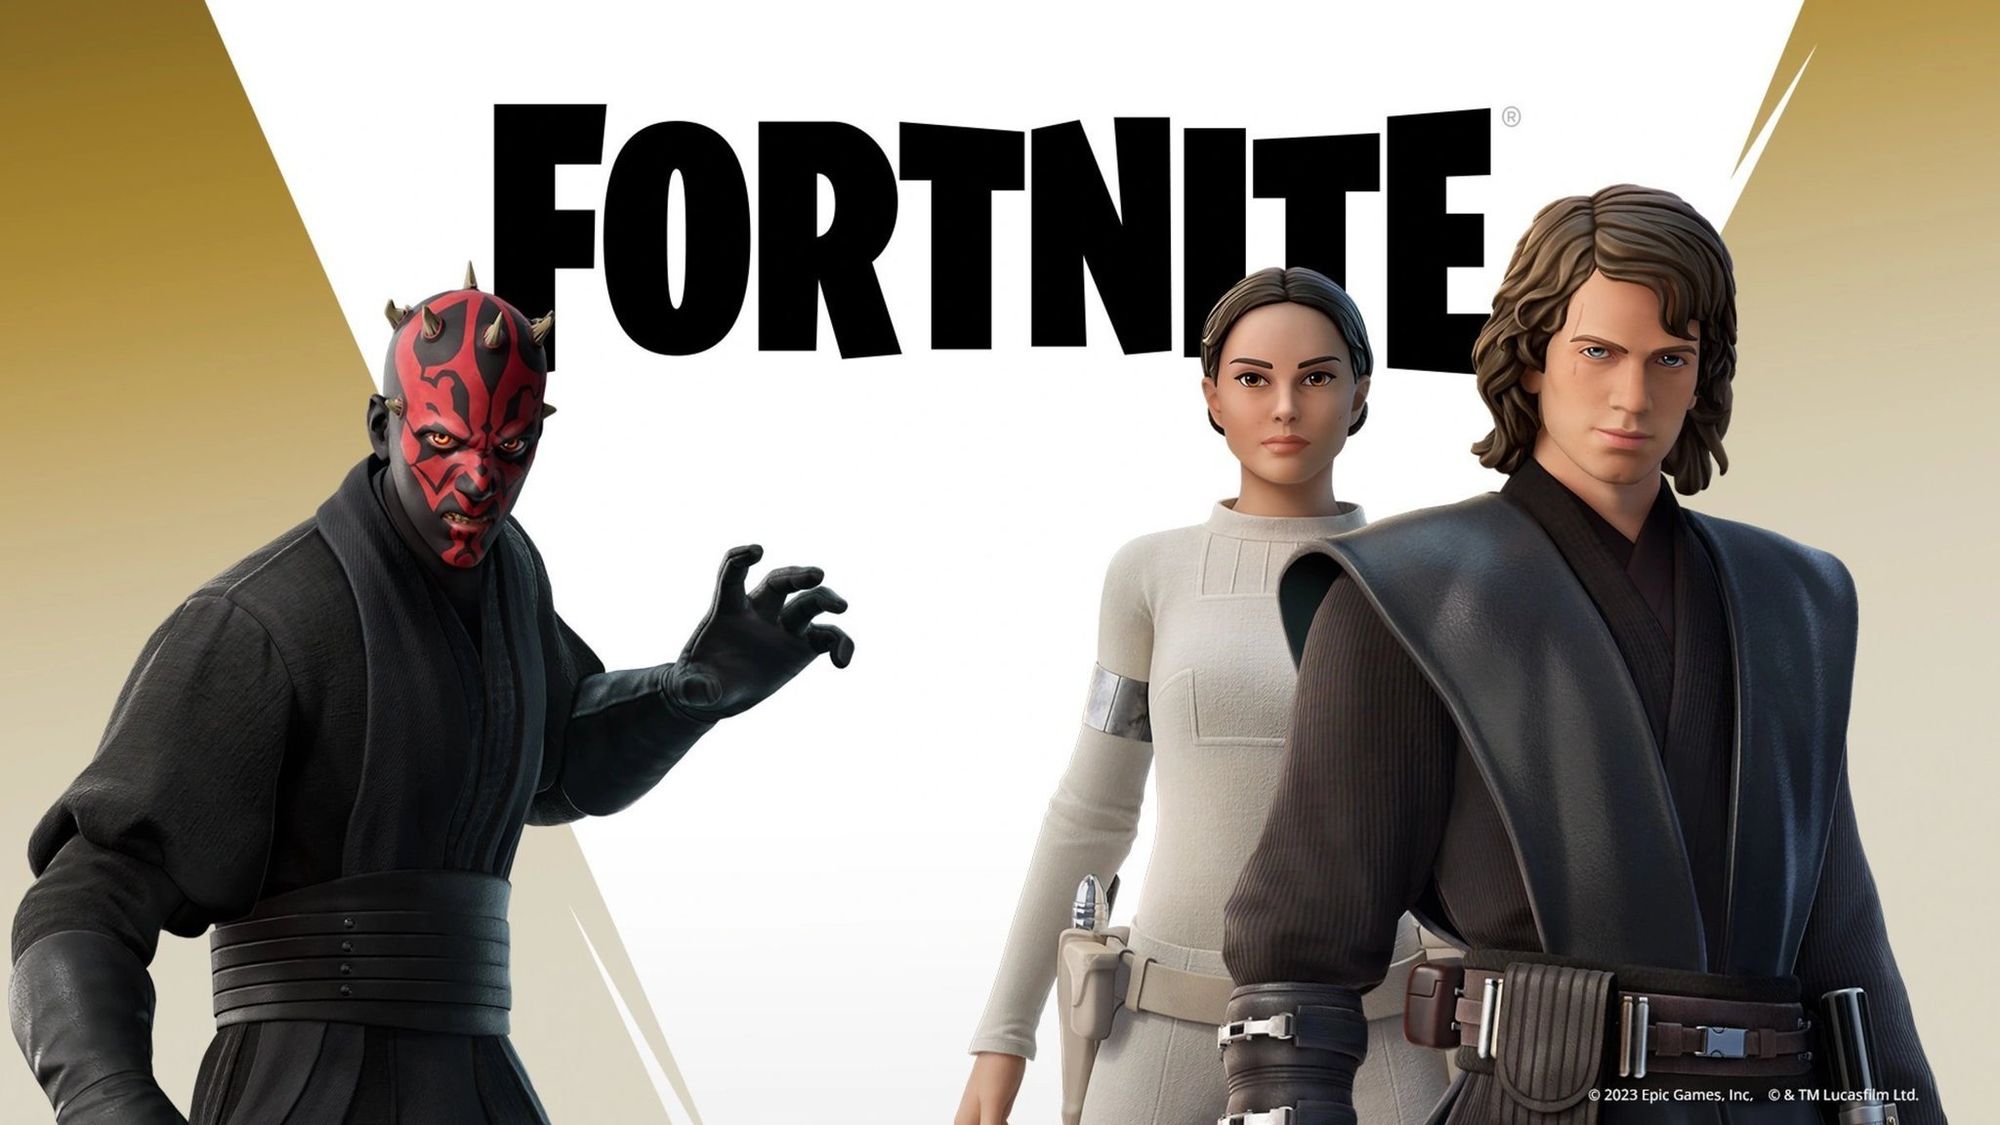 Fortnite x Star Wars: Prequel Trilogy Set Available Now